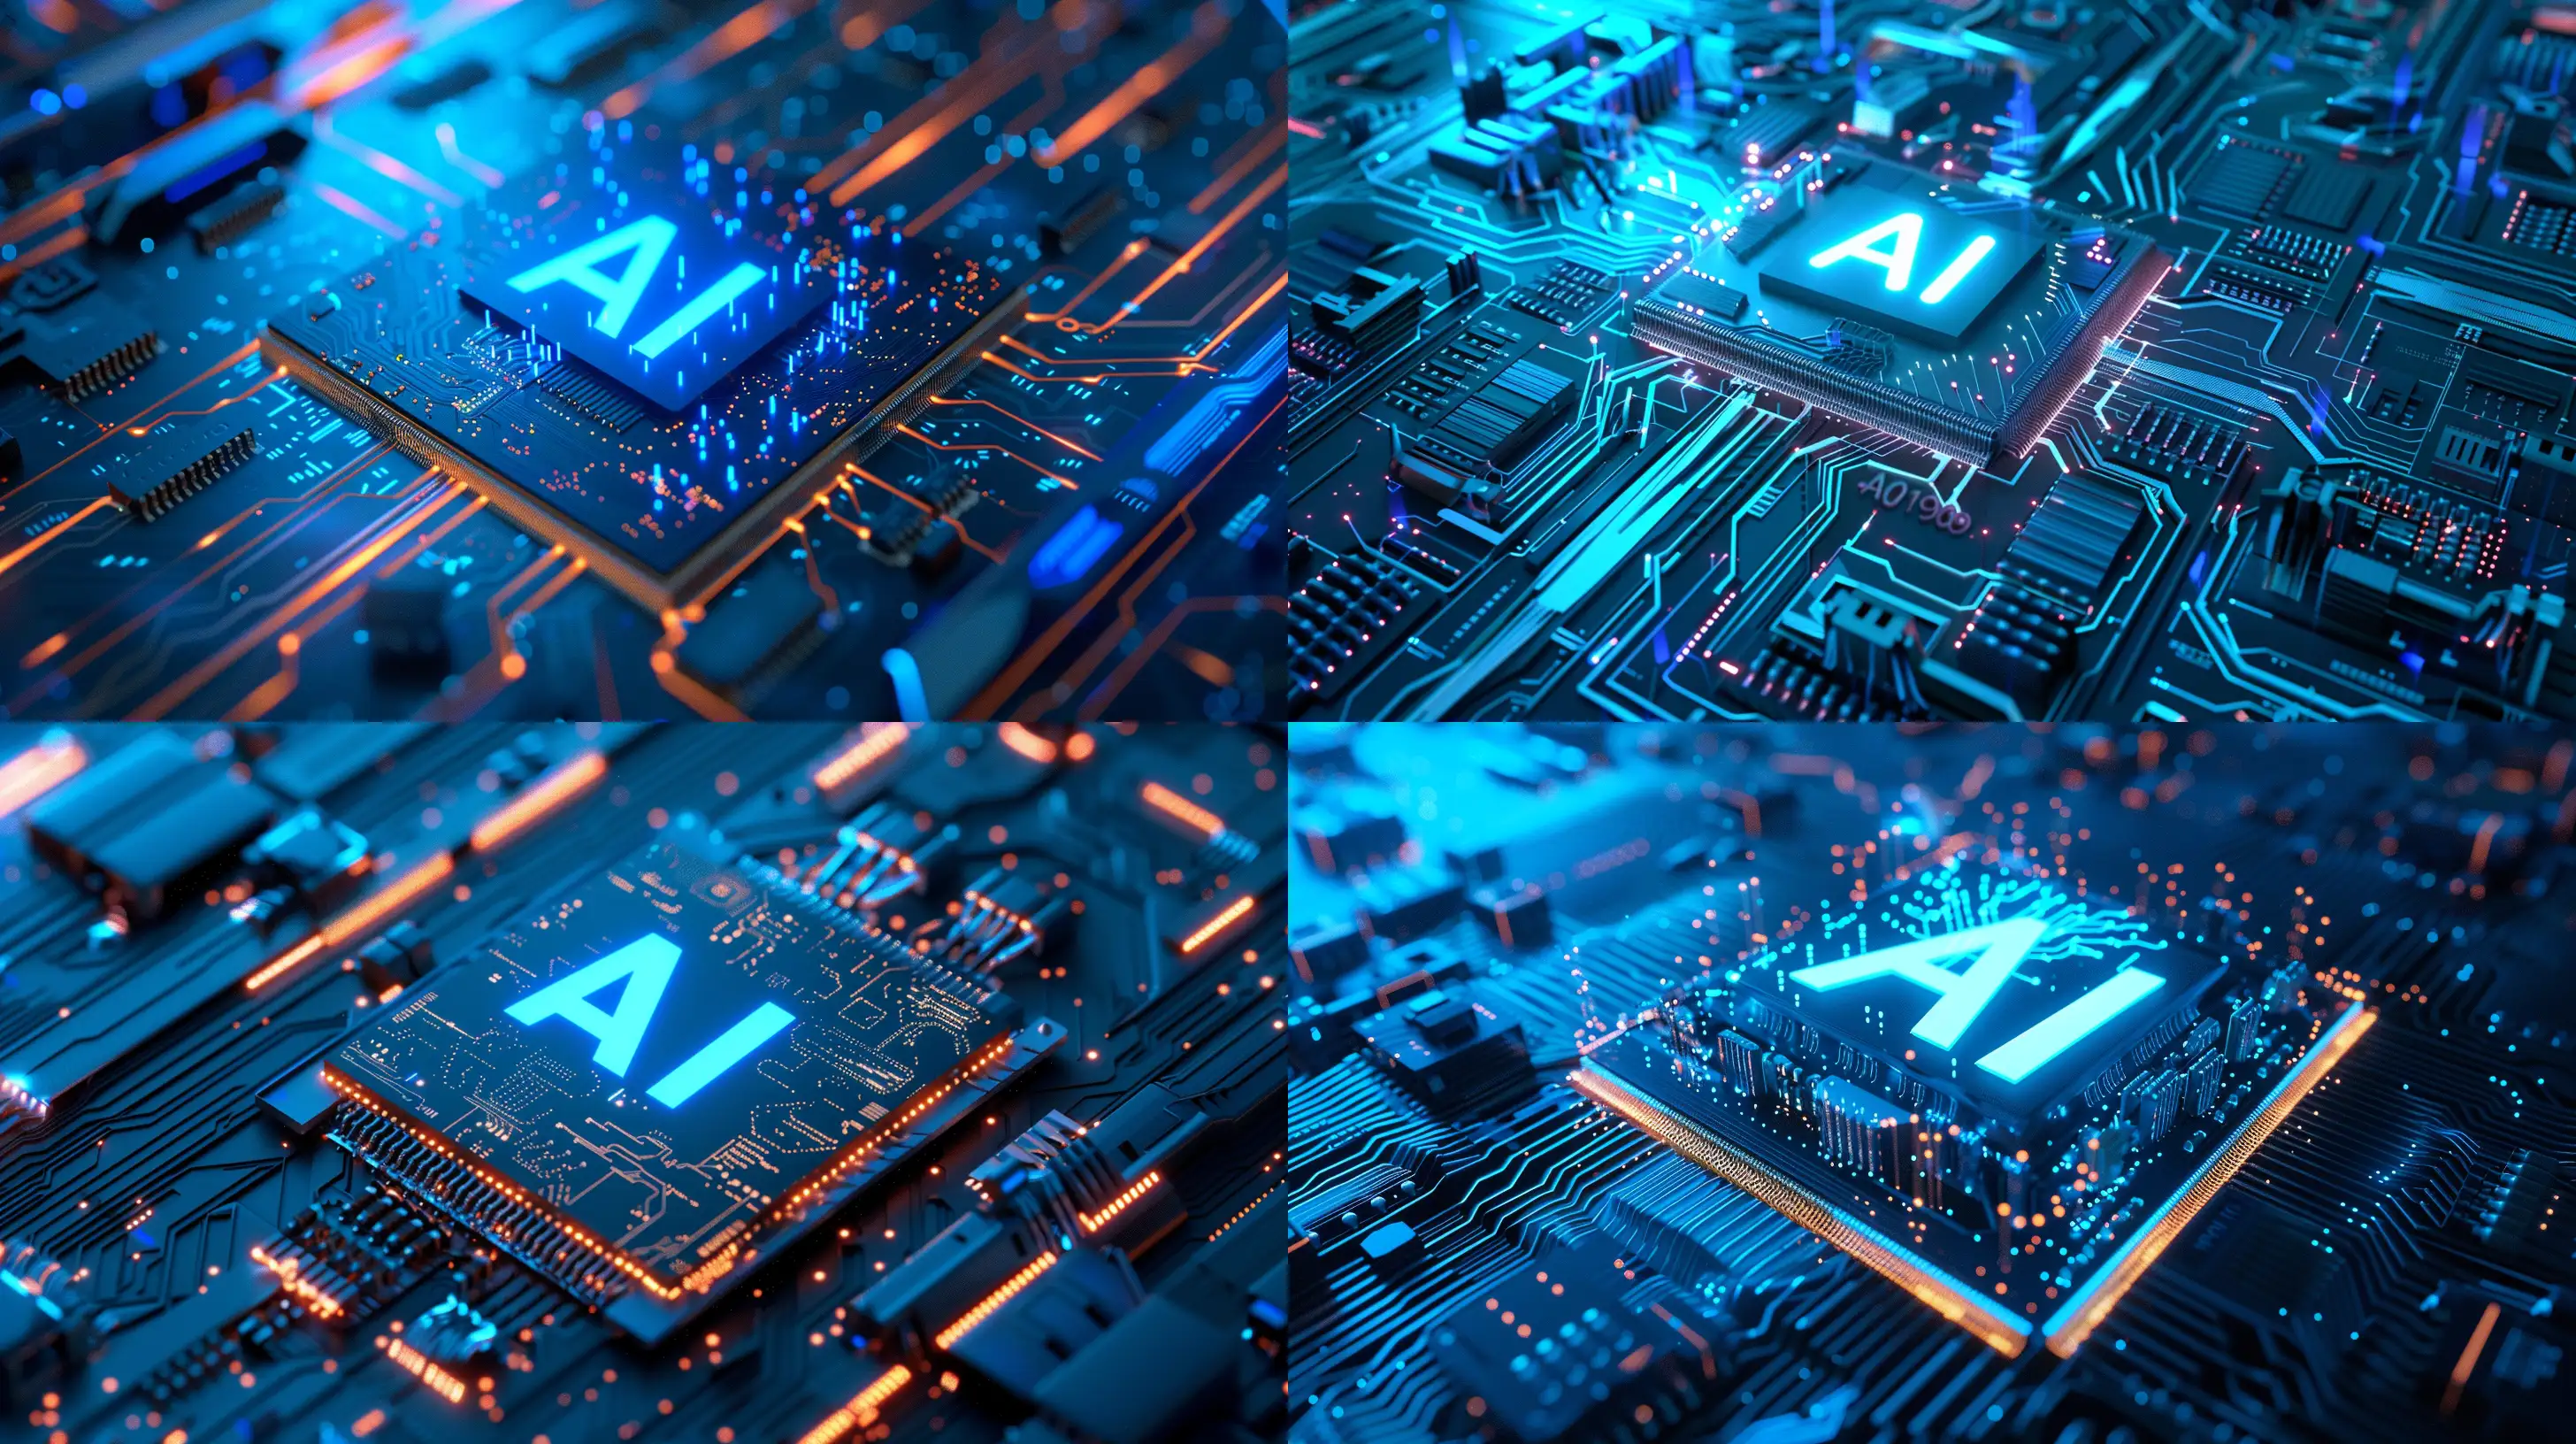 Create a highly detailed digital rendering of an advanced microchip, featuring a large 'AI' symbol on top, surrounded by glowing circuits and data streams. The image should depict a futuristic and technological ambiance, highlighted with blue tones and bright light effects --ar 16:9